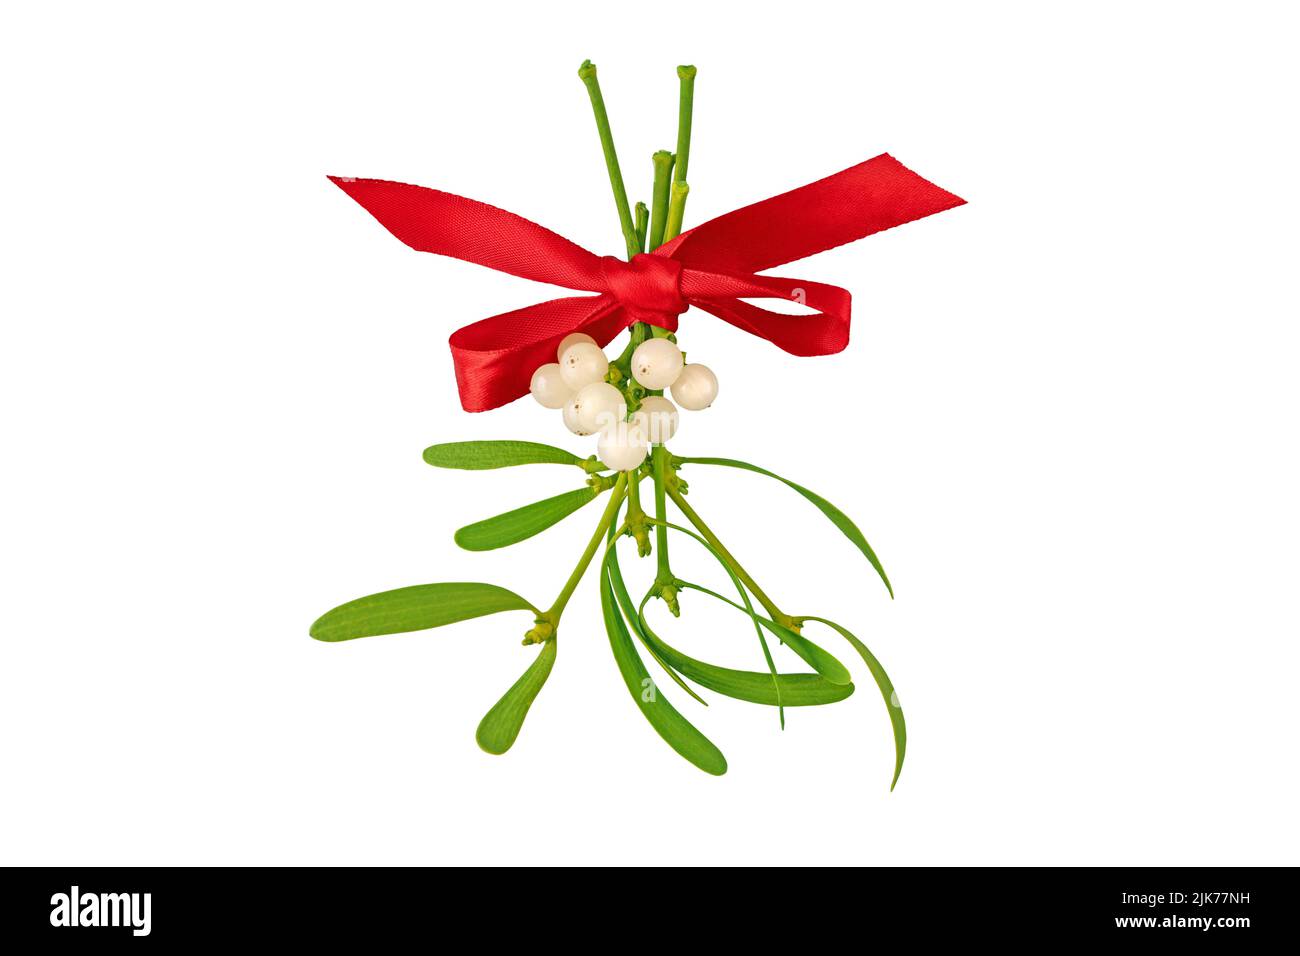 Mistletoe bunch with white berries and green leaves tied with red satin bow . Christmas decoration isolated on white. Stock Photo